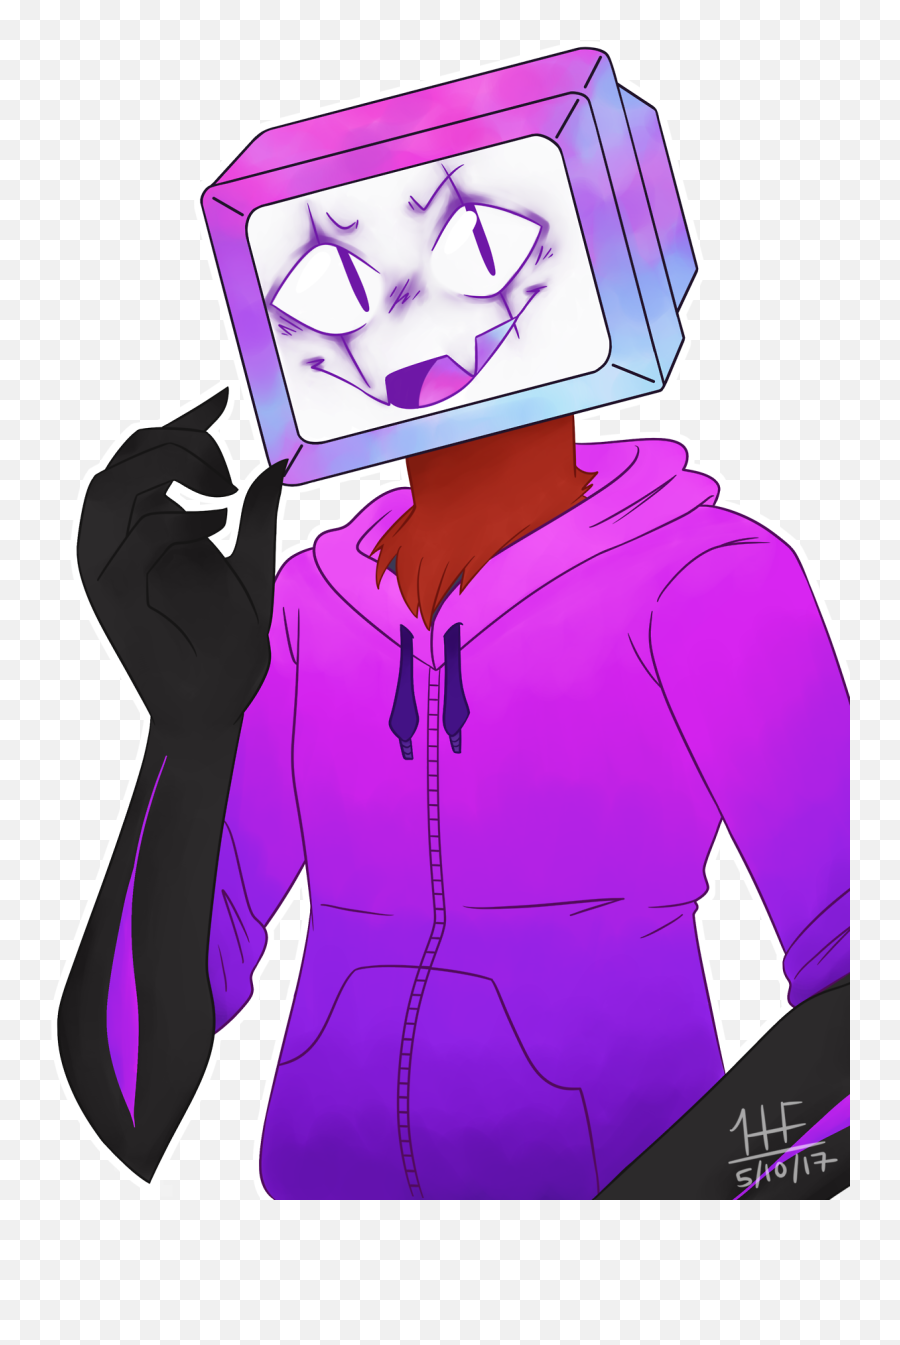 Download Pyrocynical By Pyroobsessed - Fem Pyrocynical Png Pyrocynical Fanart Png,Pyrocynical Transparent